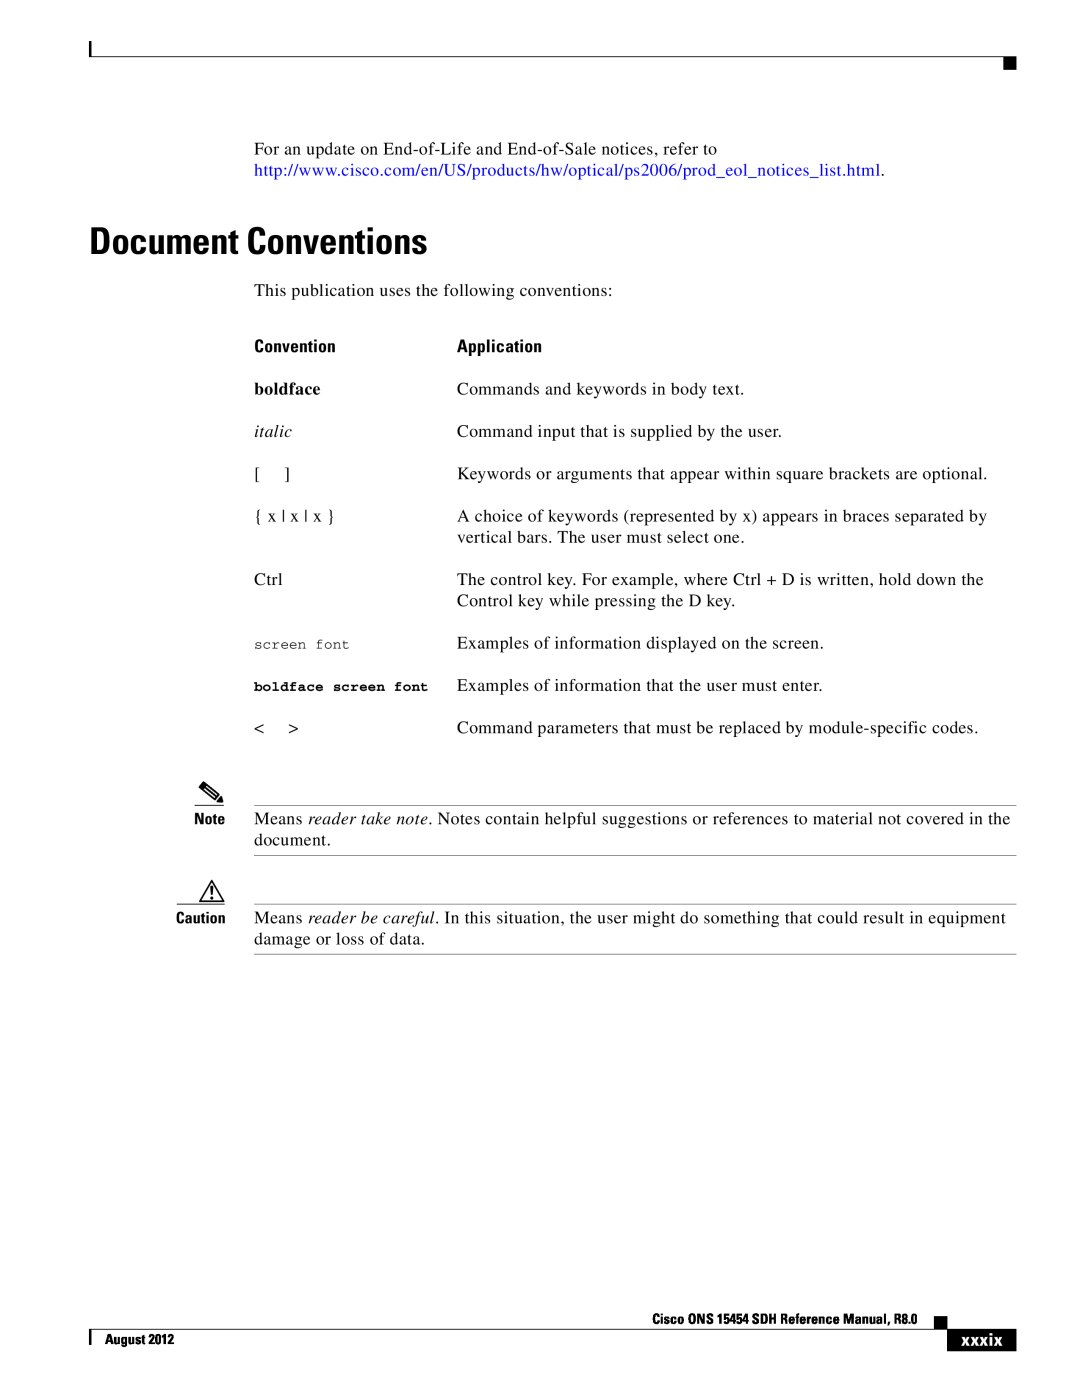 Cisco Systems 15454 specifications Document Conventions, italic, xxxix, Application, boldface 